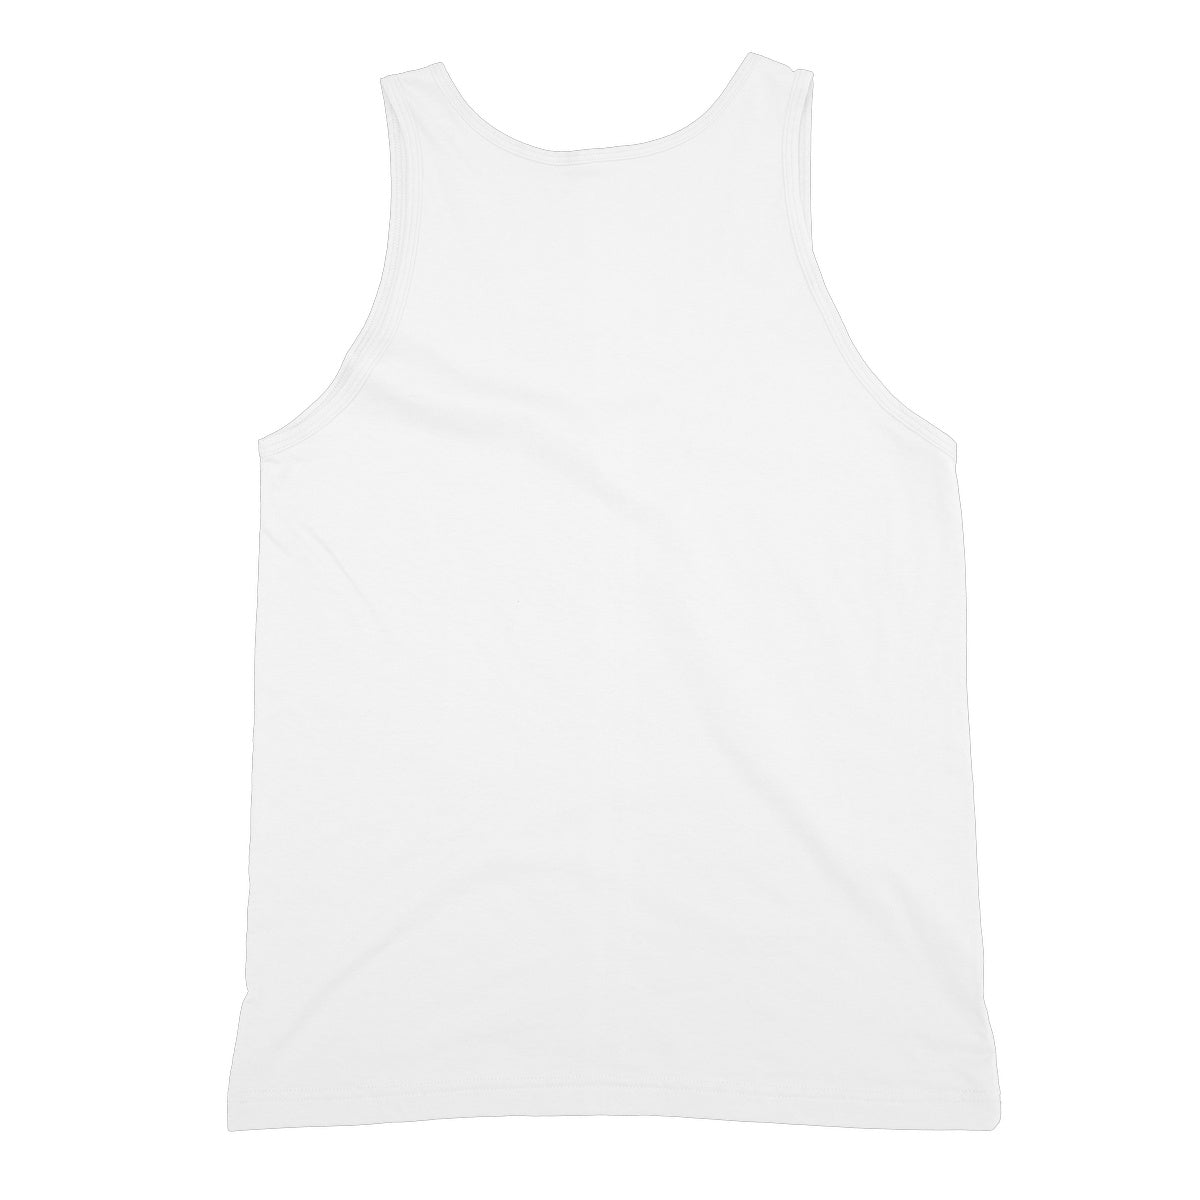 35 Sound Waves Clear including the Platonic Solids Softstyle Tank Top